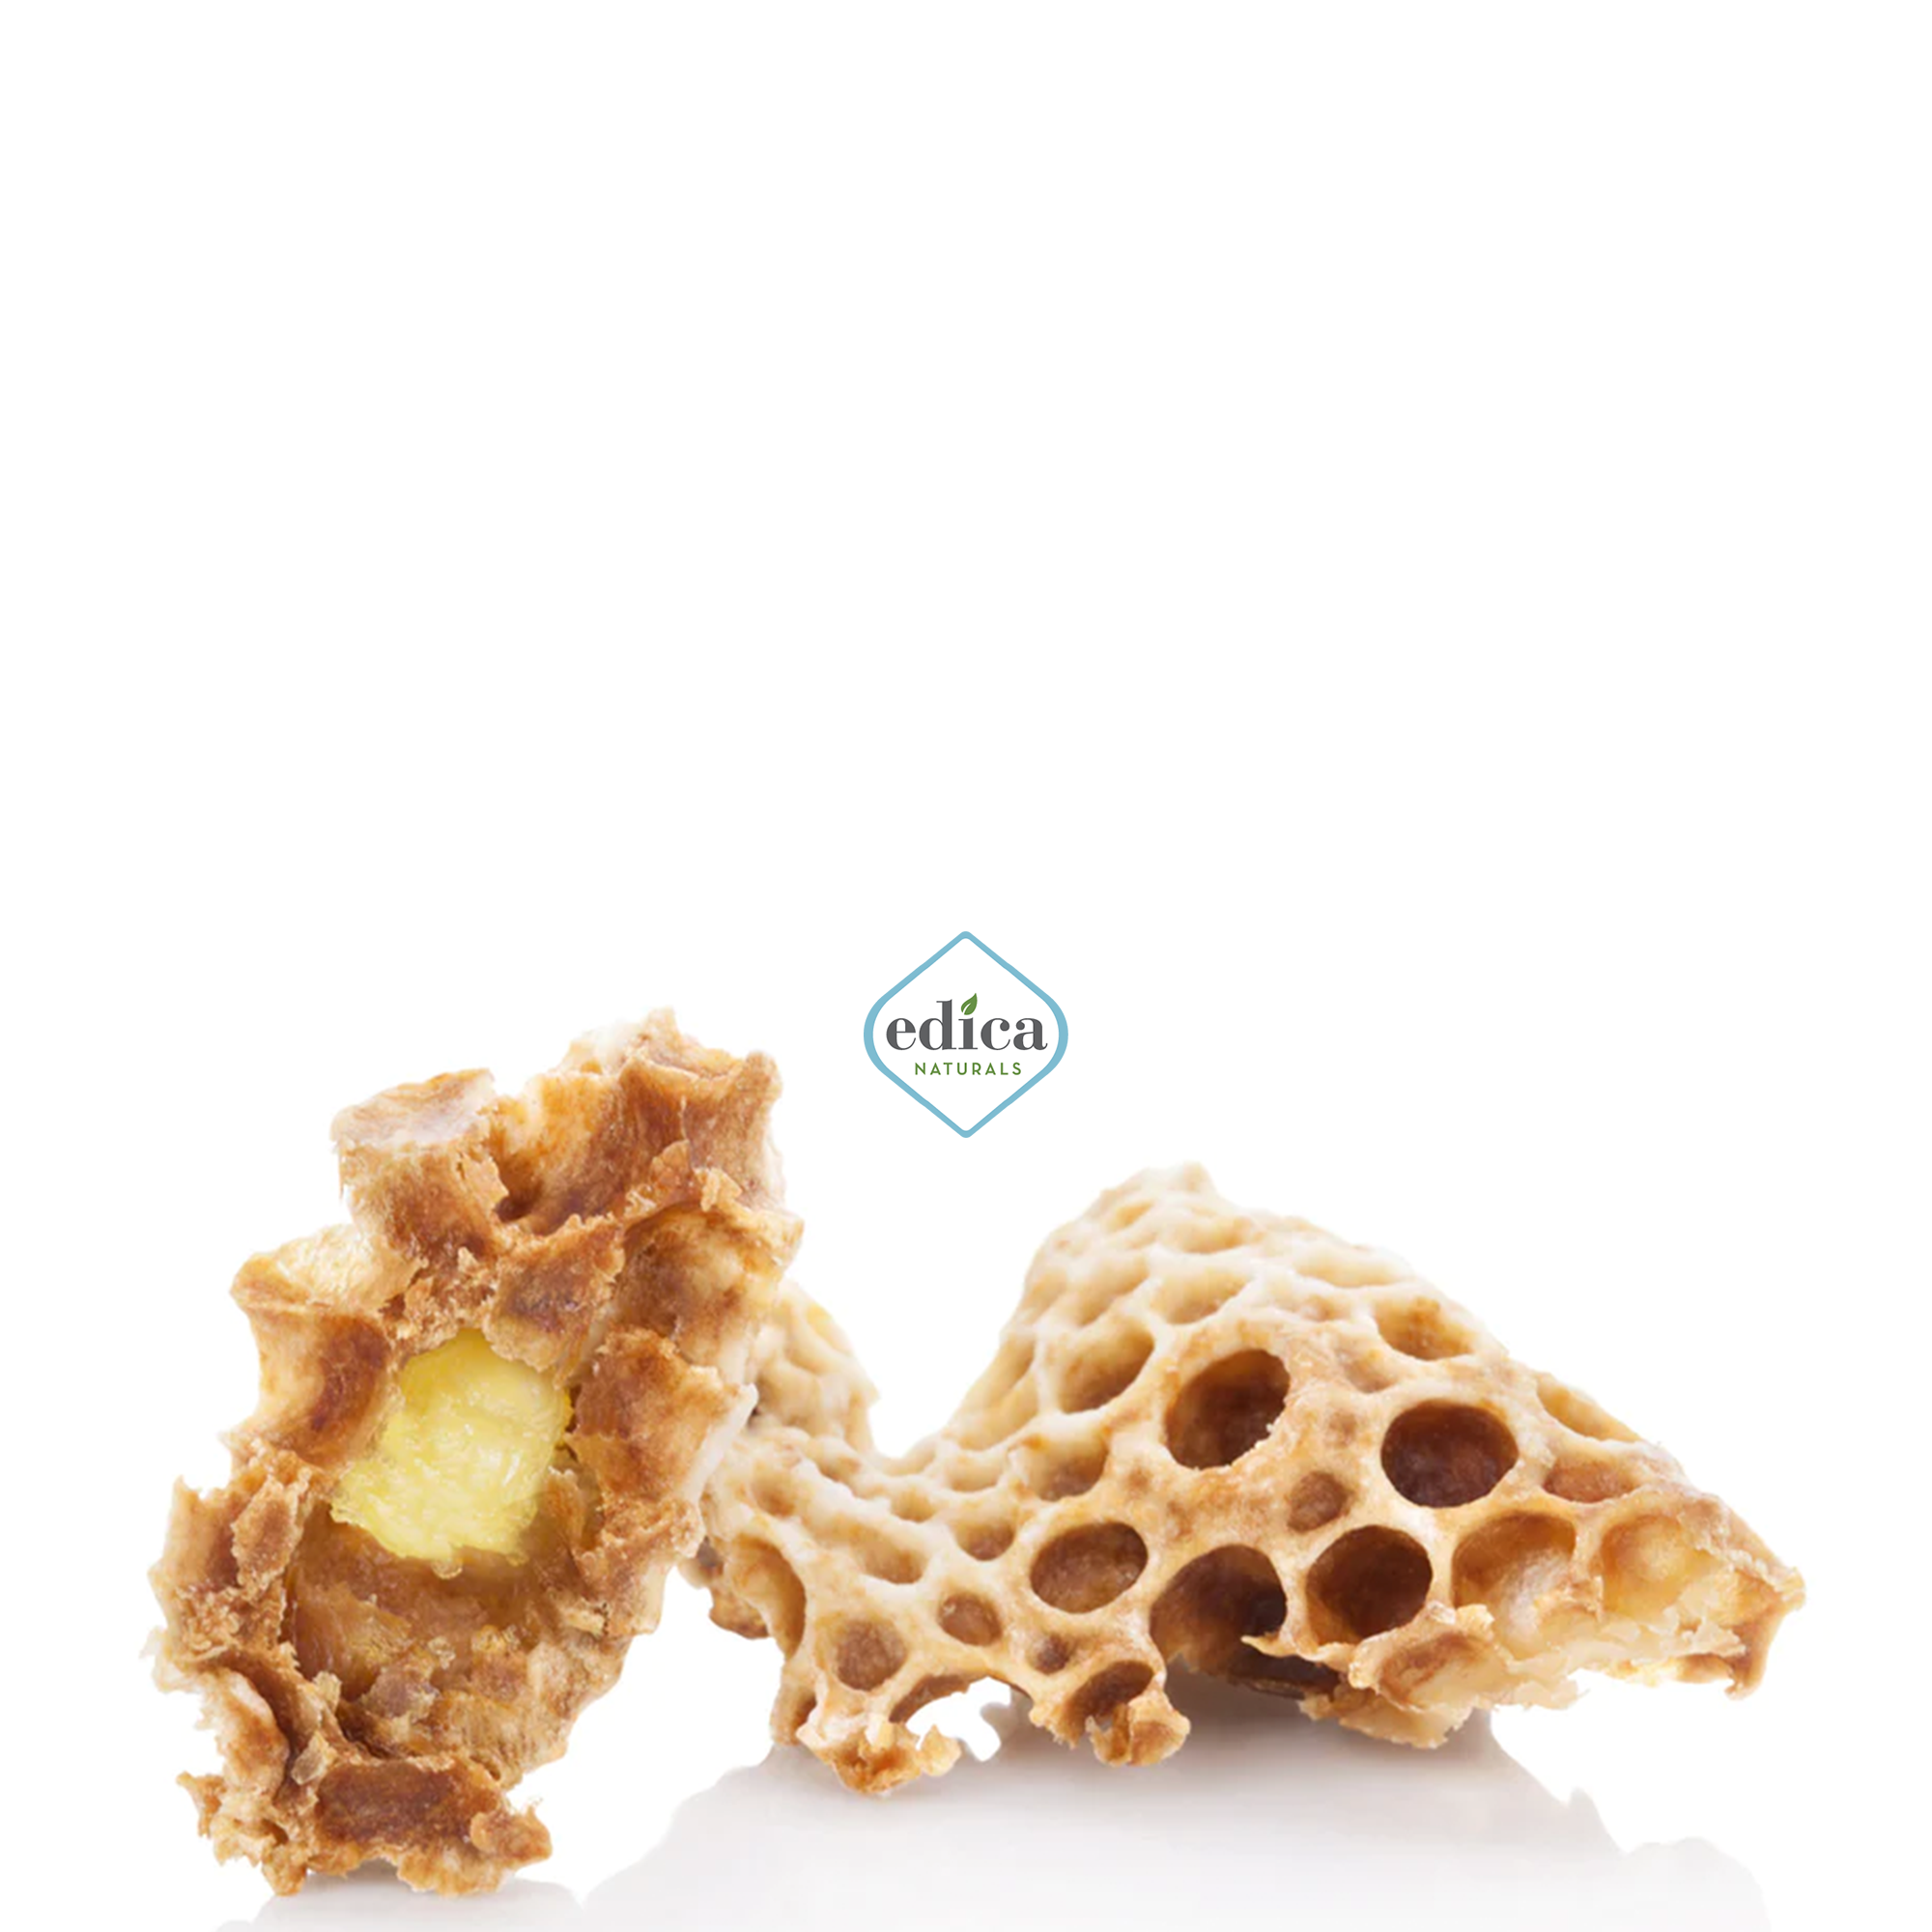 Royal Jelly: The Natural Way to Improve Mental Focus